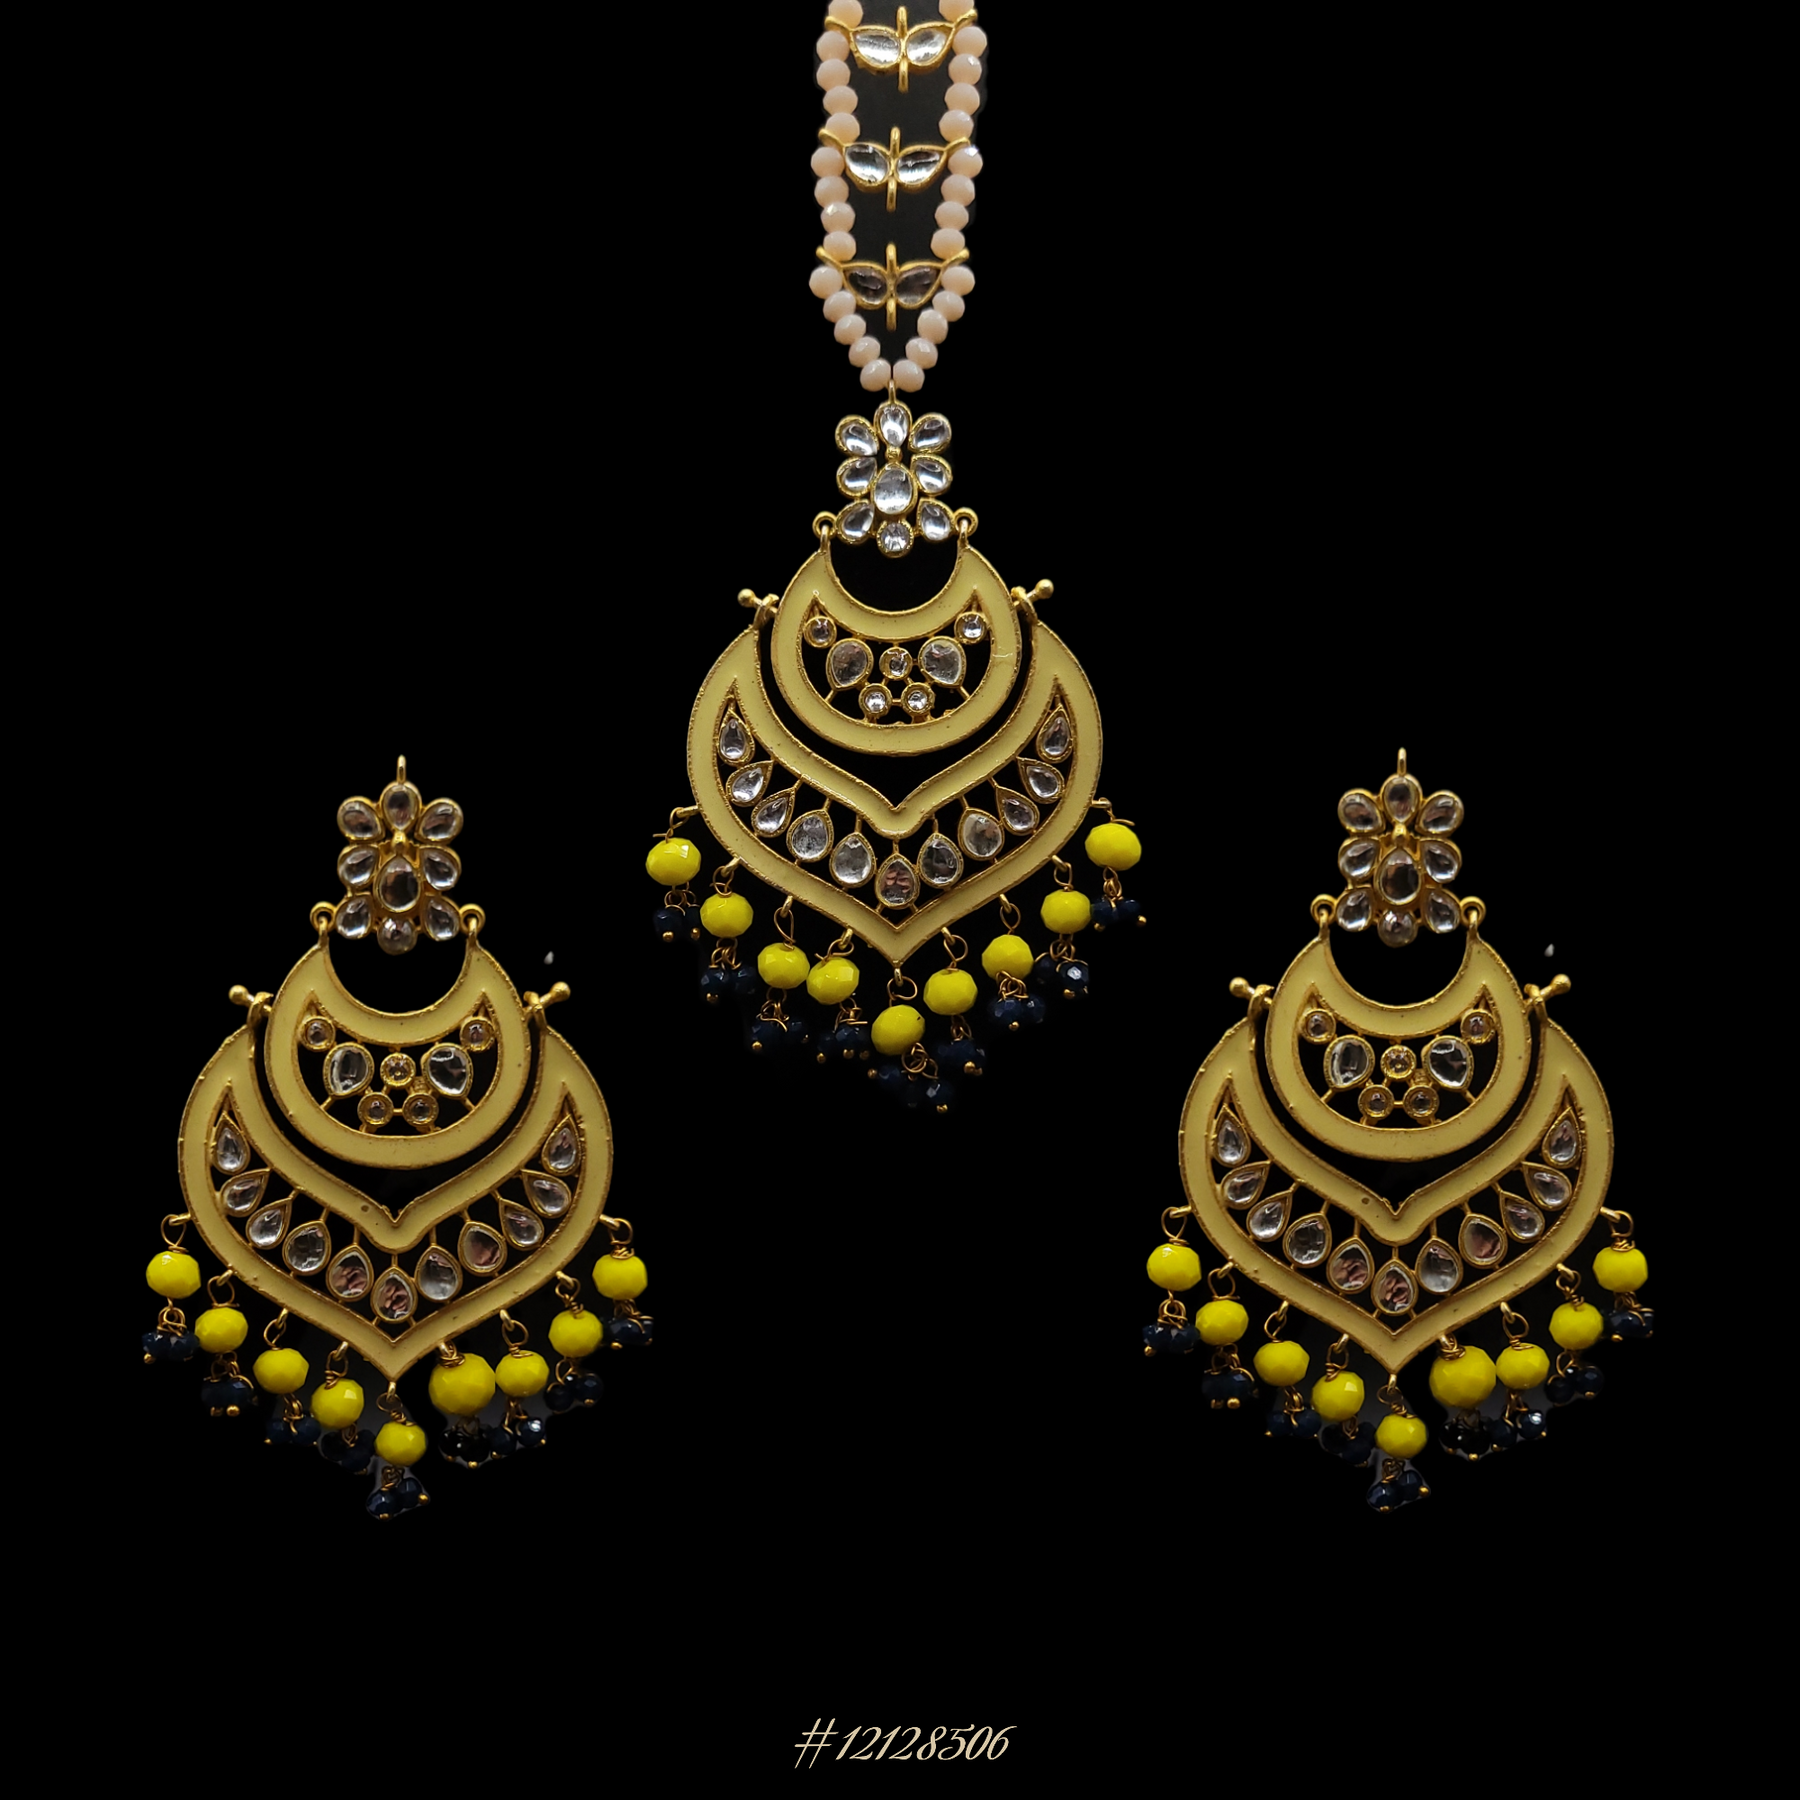 ELEGANT EARRINGS WITH MAANG TIKKA (HEAD PIECE) IN GOLD/YELLOW AND NAVY BLUE